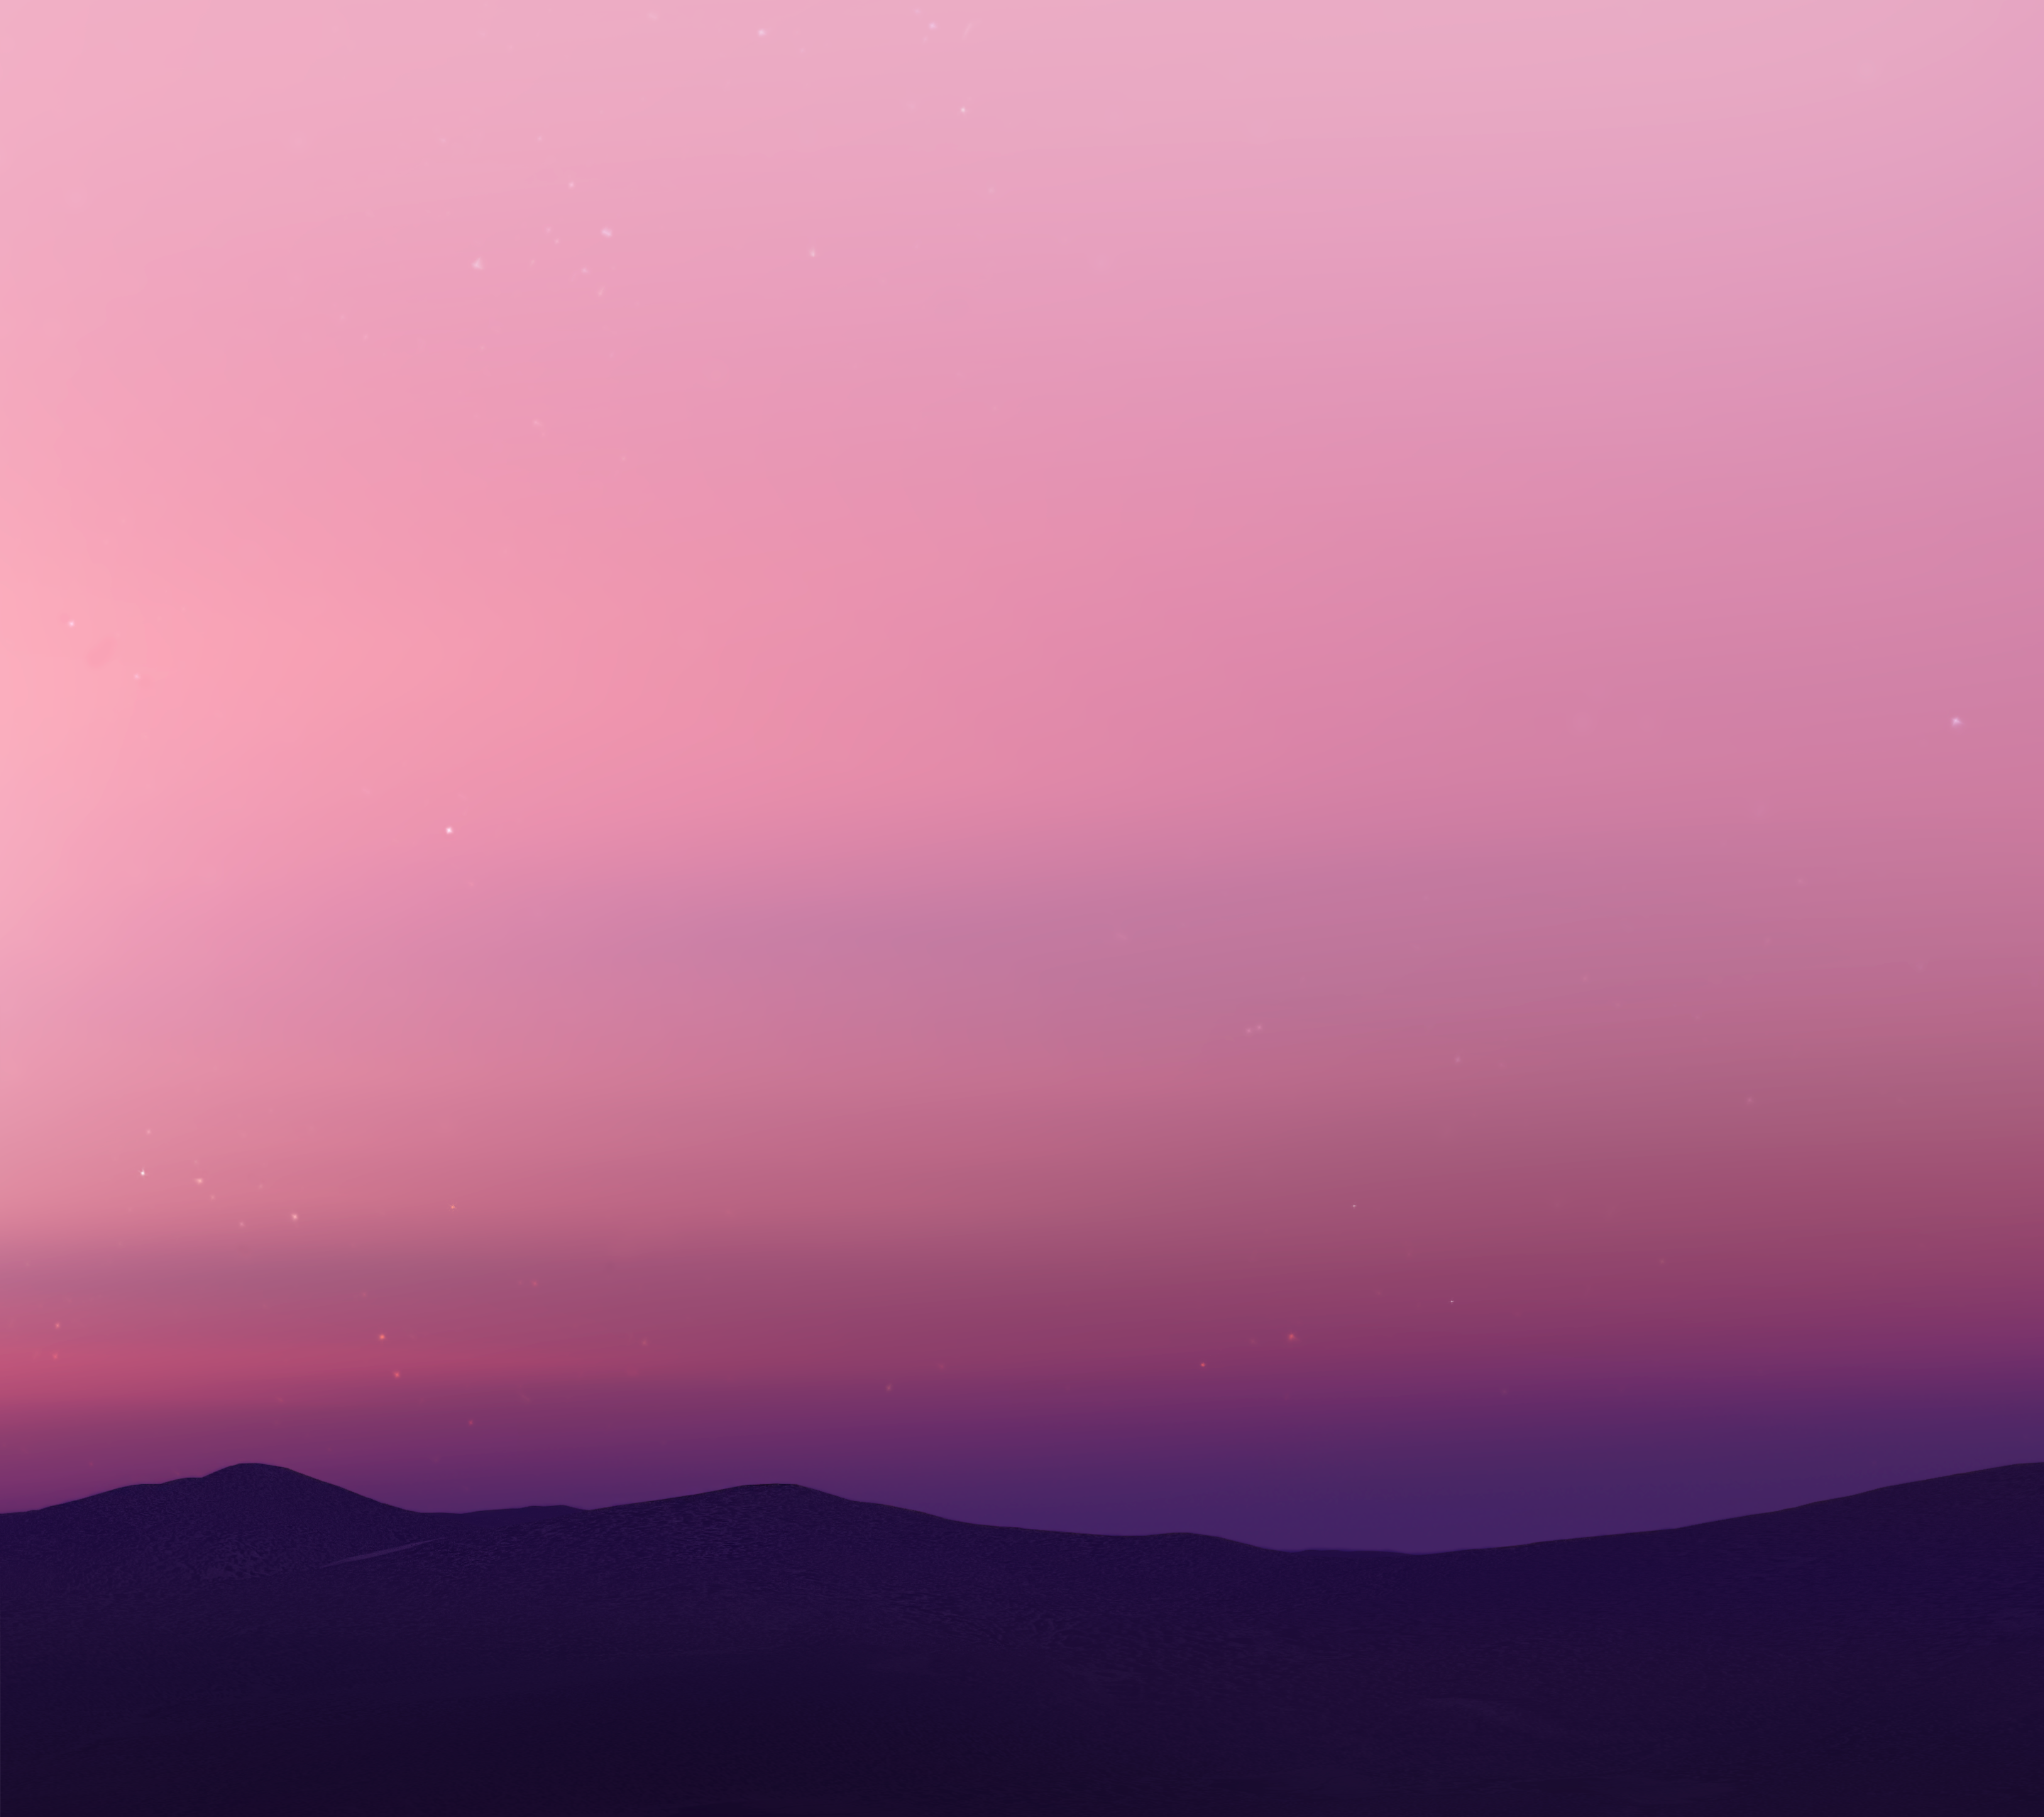 Want the new Android N wallpaper Download it here